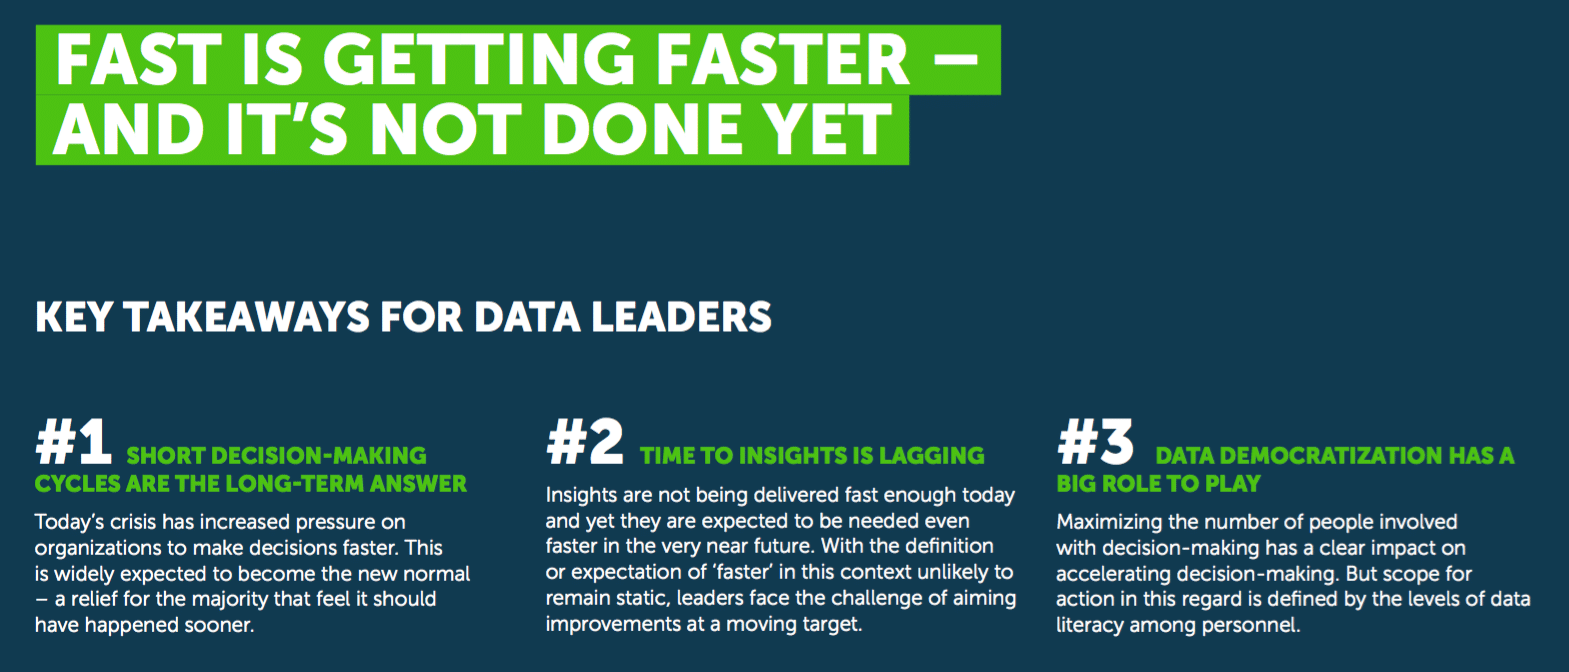 COVID is forcing businesses to make faster decisions—yet most rely on outdated data